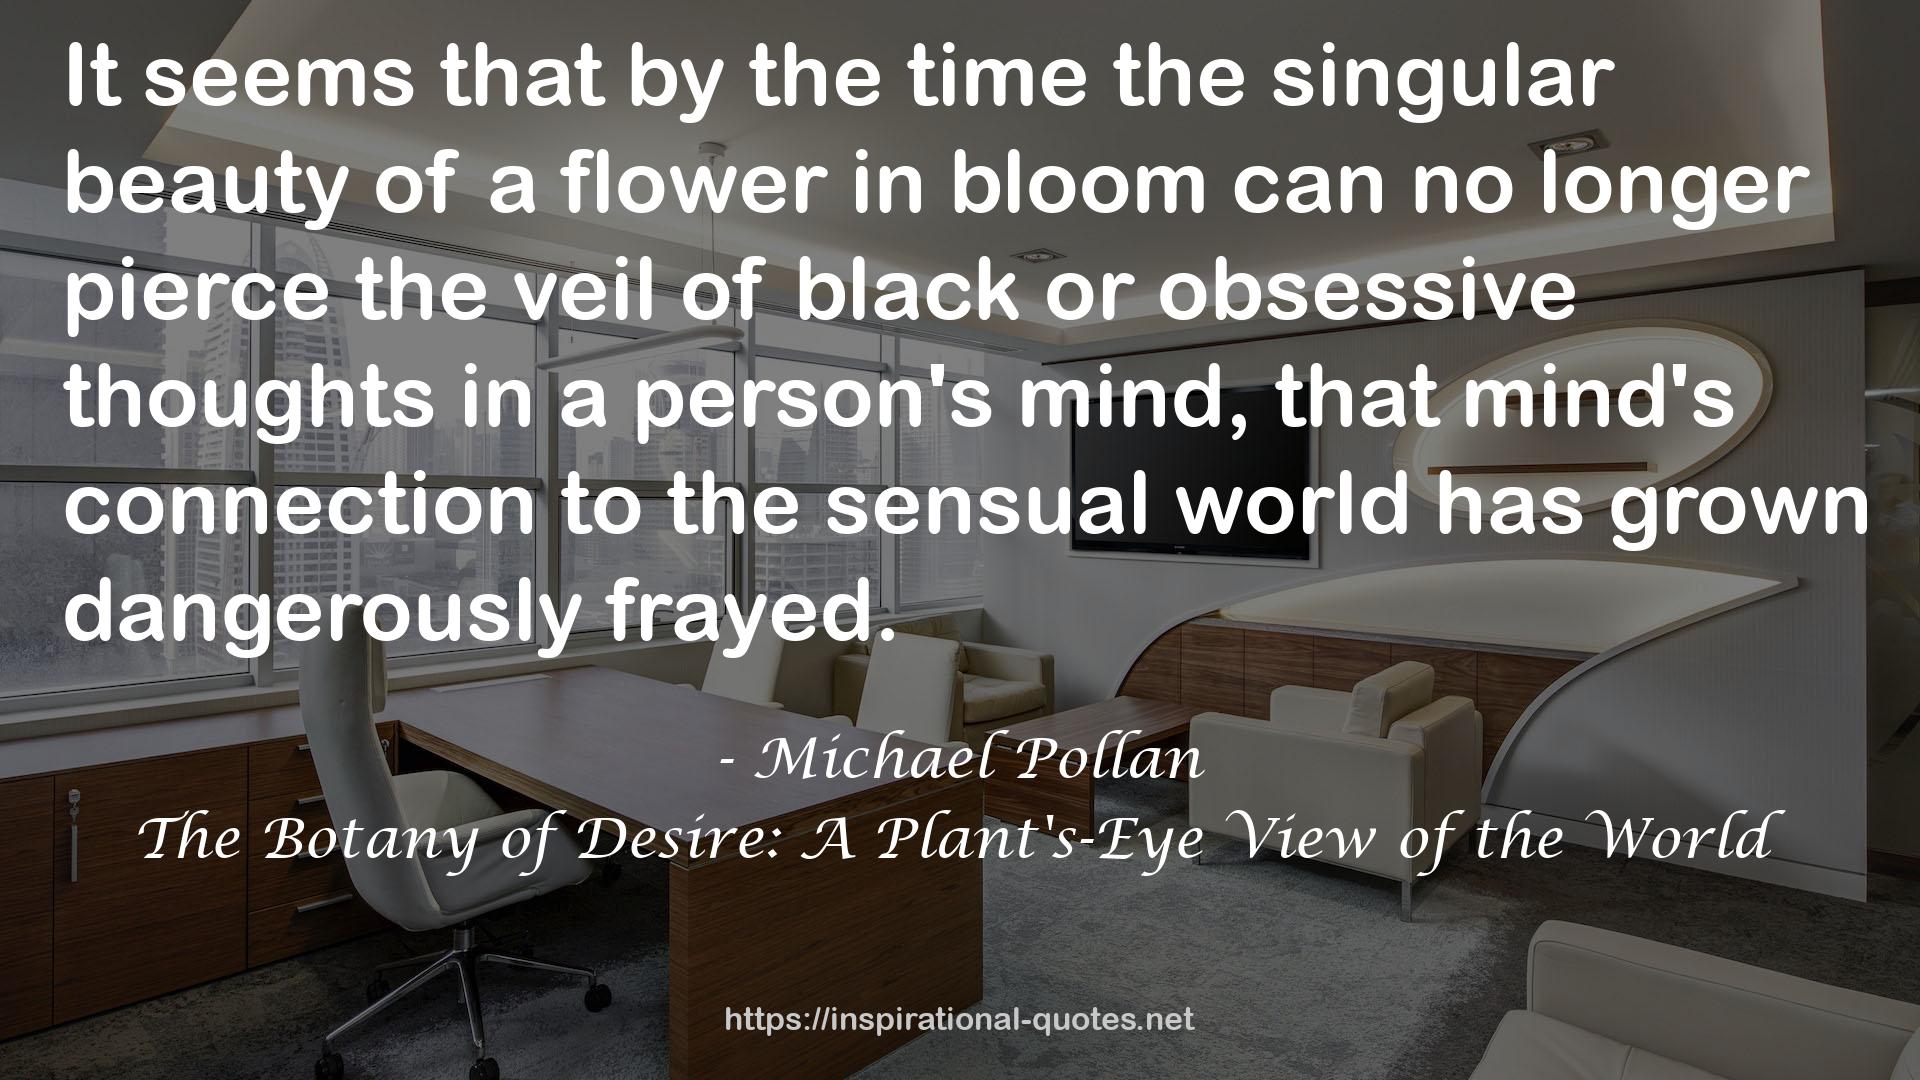 The Botany of Desire: A Plant's-Eye View of the World QUOTES